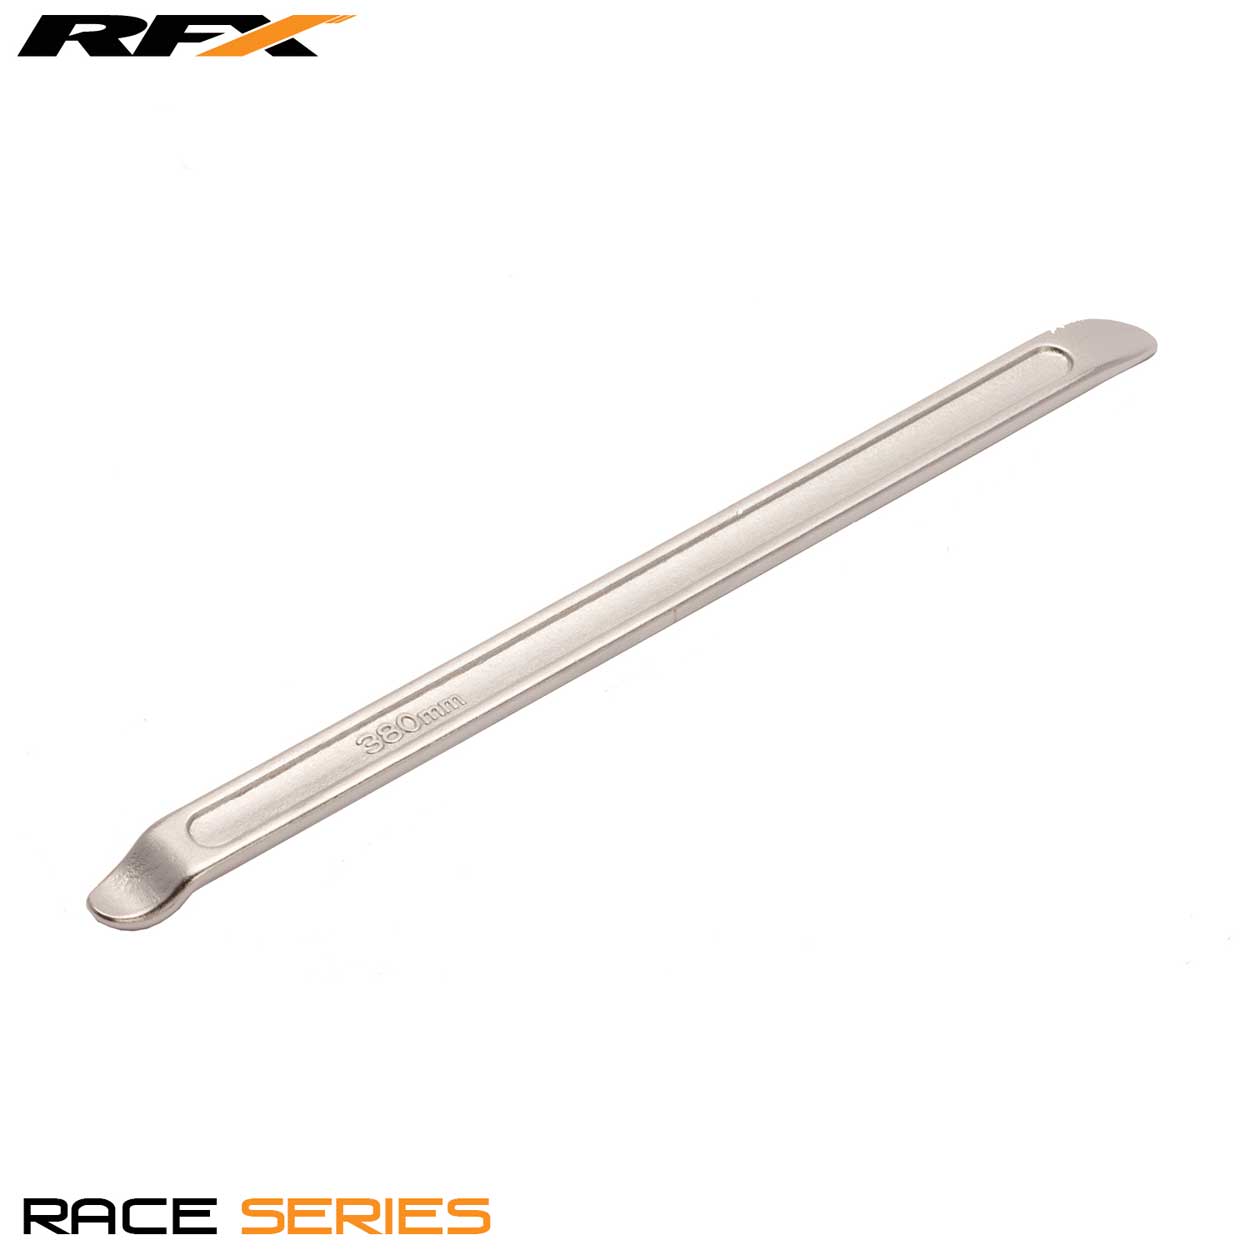 RFX Race Dual Spoon end Tyre Lever Silver Universal 280mm / 11in Long